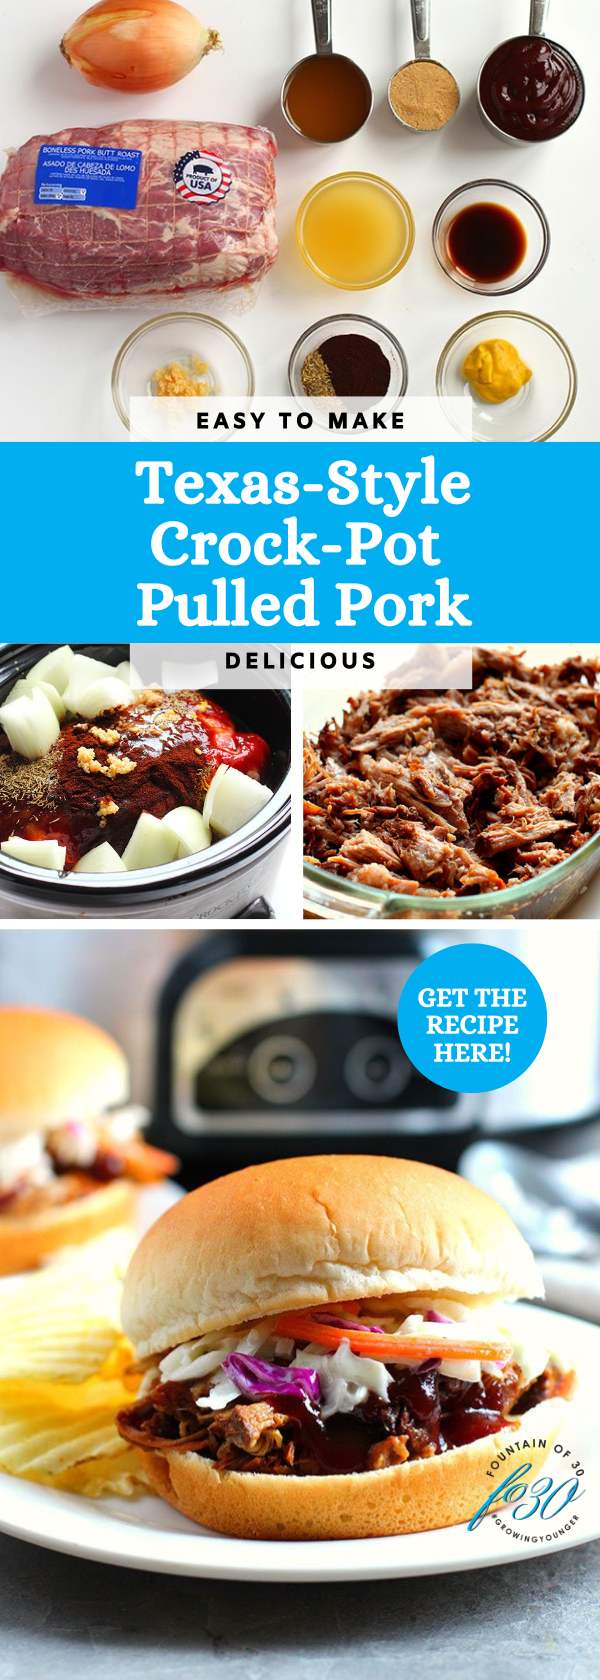 easy to make pulled pork in a crockpot fountainof30